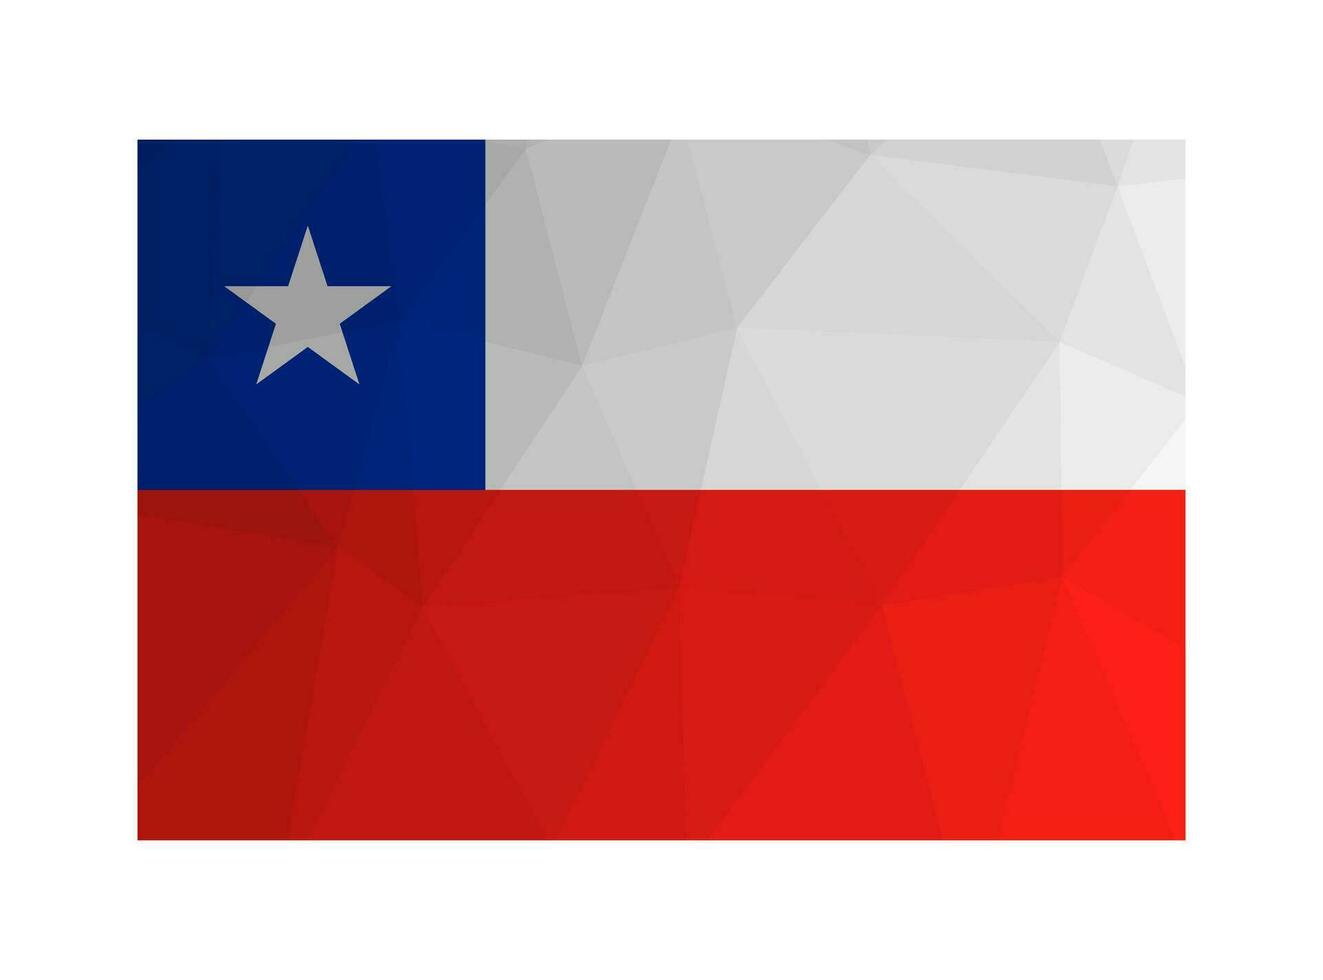 Vector isolated illustration. National chilean flag with five-pointed star and in white, red, blue colors. Official symbol of Chile. Creative design in low poly style with triangular shapes